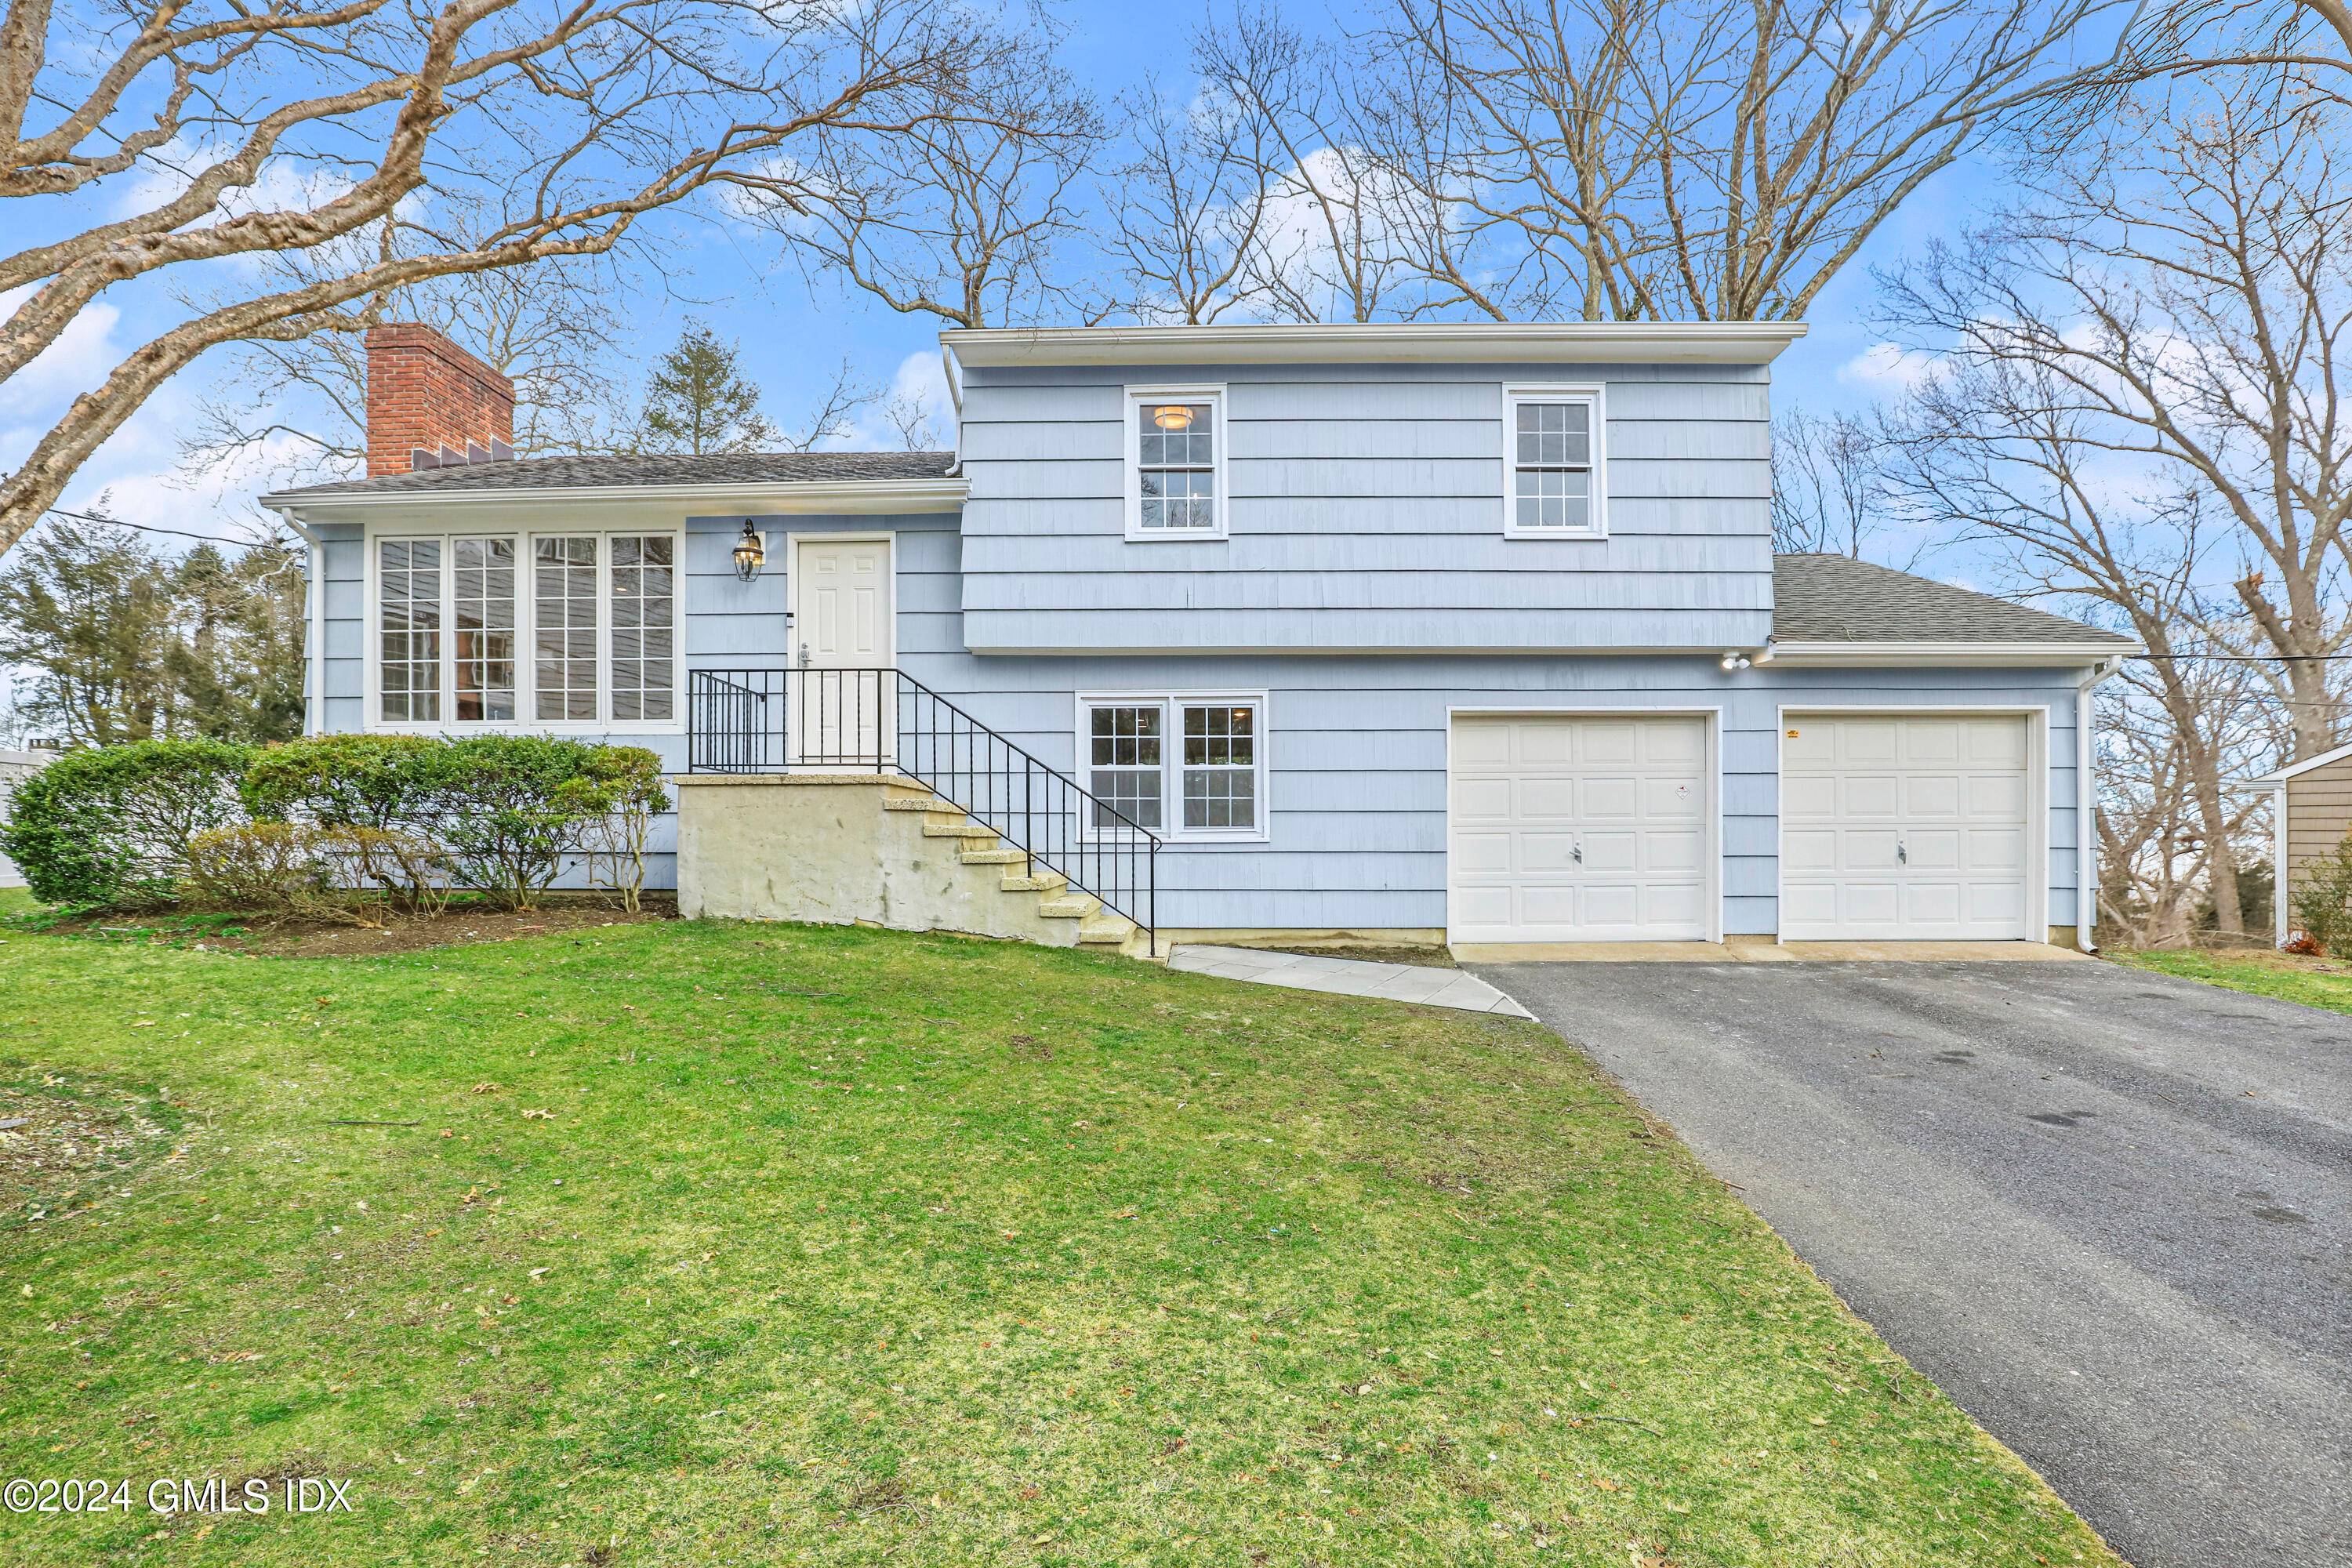 Welcome to 53 Gregory Road, nestled in the peaceful neighborhood of Cos Cob on a cul de sac.